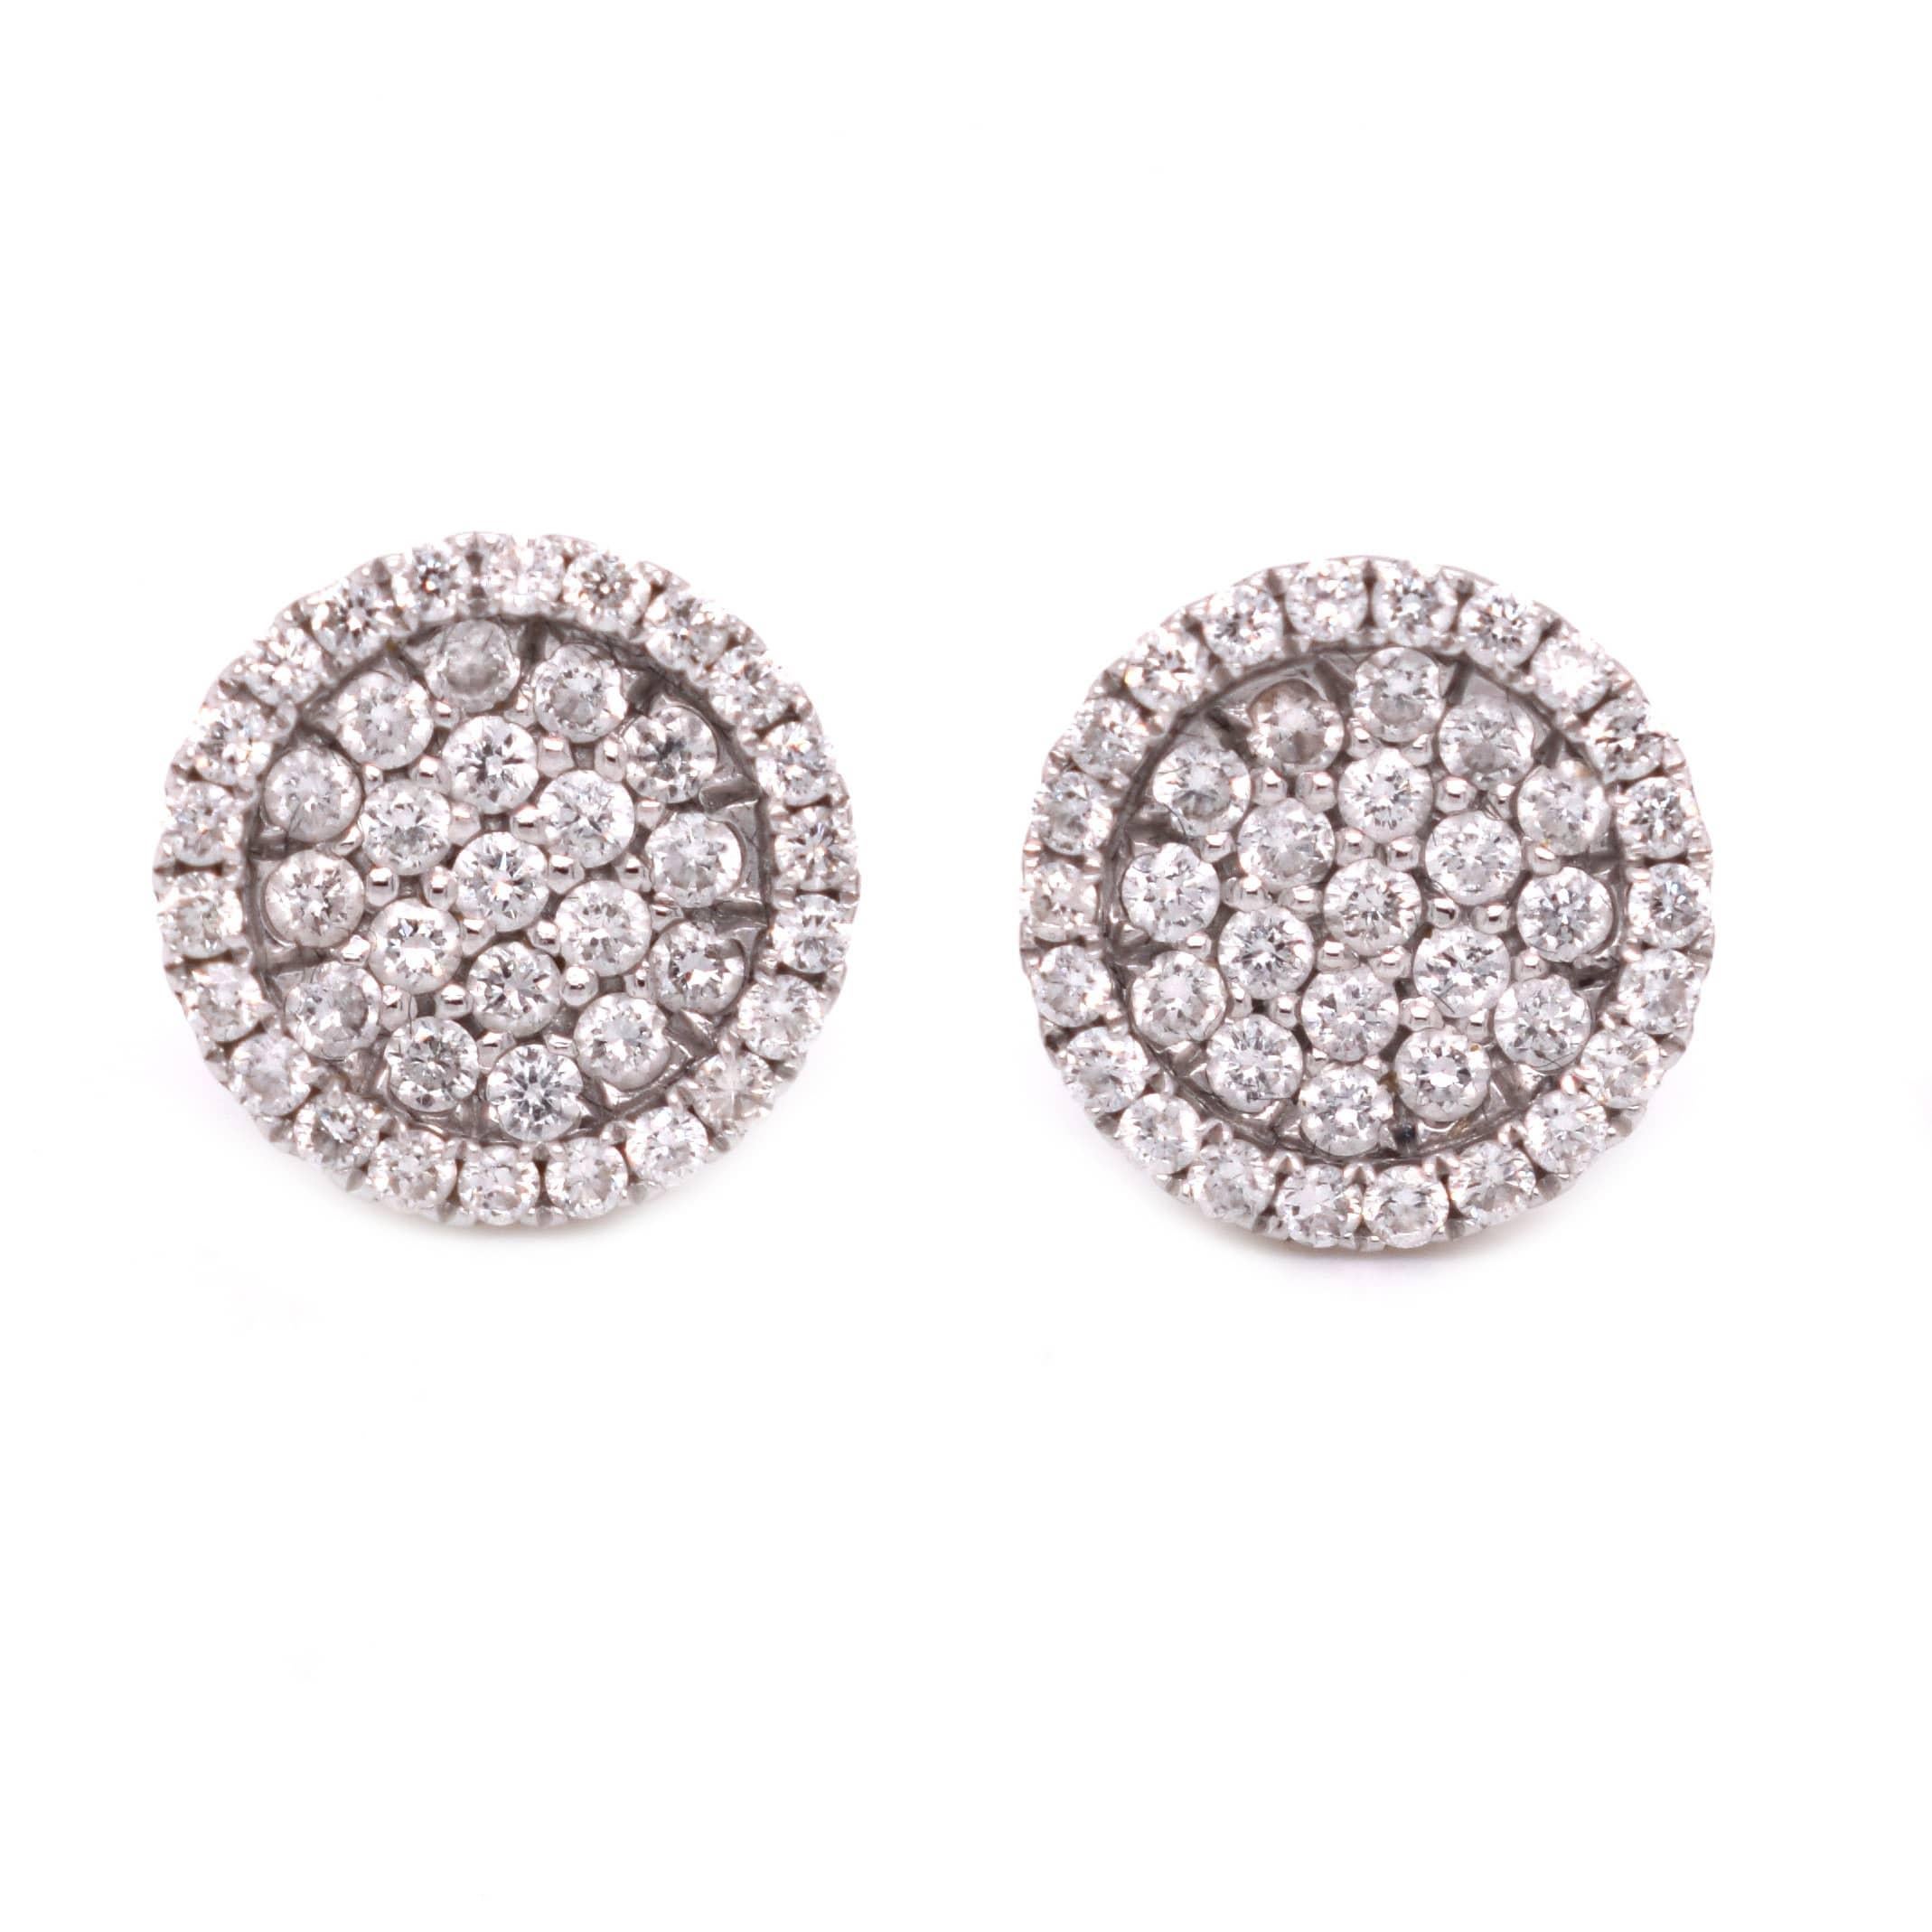 Brilliance Jewels, Miami
Questions? Call Us Anytime!
786,482,8100

Style: Studs / Optical Illusion Halo Studs

Metal: White Gold

Metal Purity: 14k

Stones: 88 Round Brilliant Cut Diamonds (44 each stud)

Total Carat Weight:  approx. 1

Diamond 